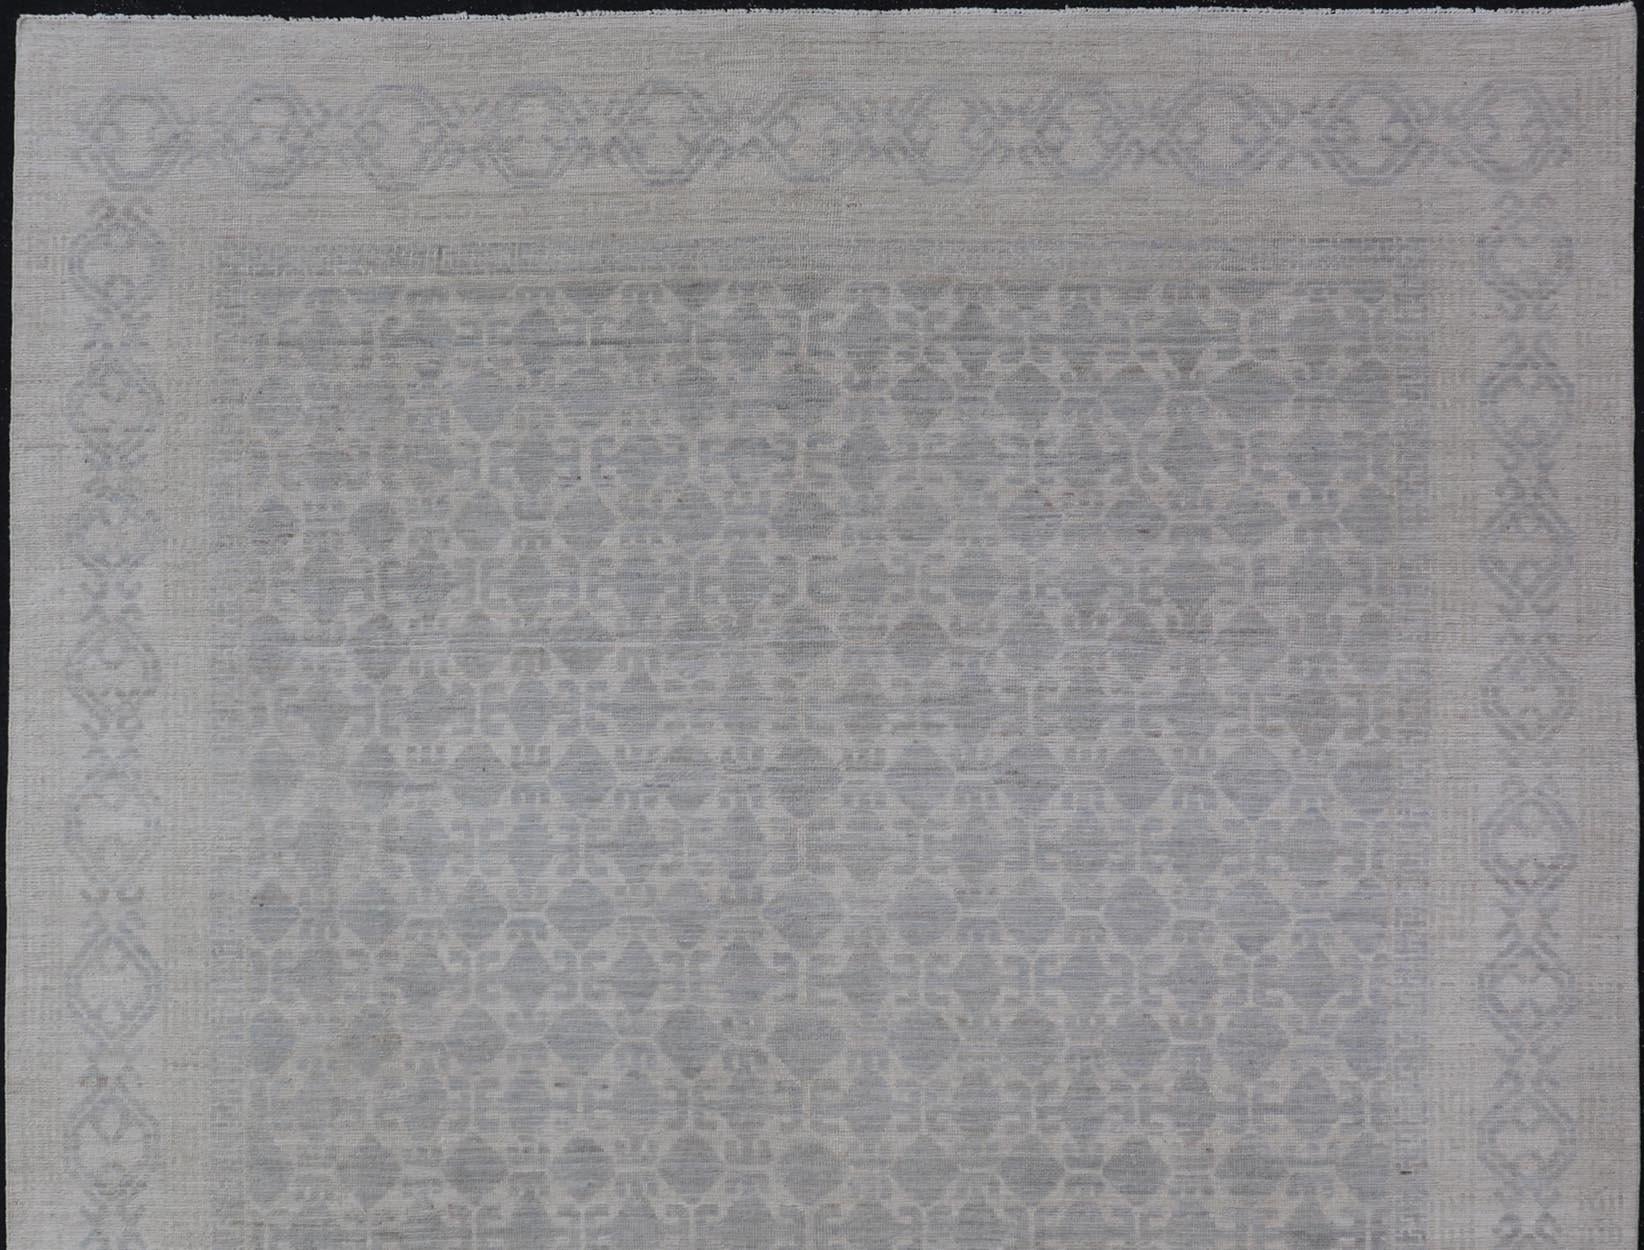 Afghan Modern All-Over Tribal Motif Khotan Area Rug in Muted Gray's and Cream For Sale